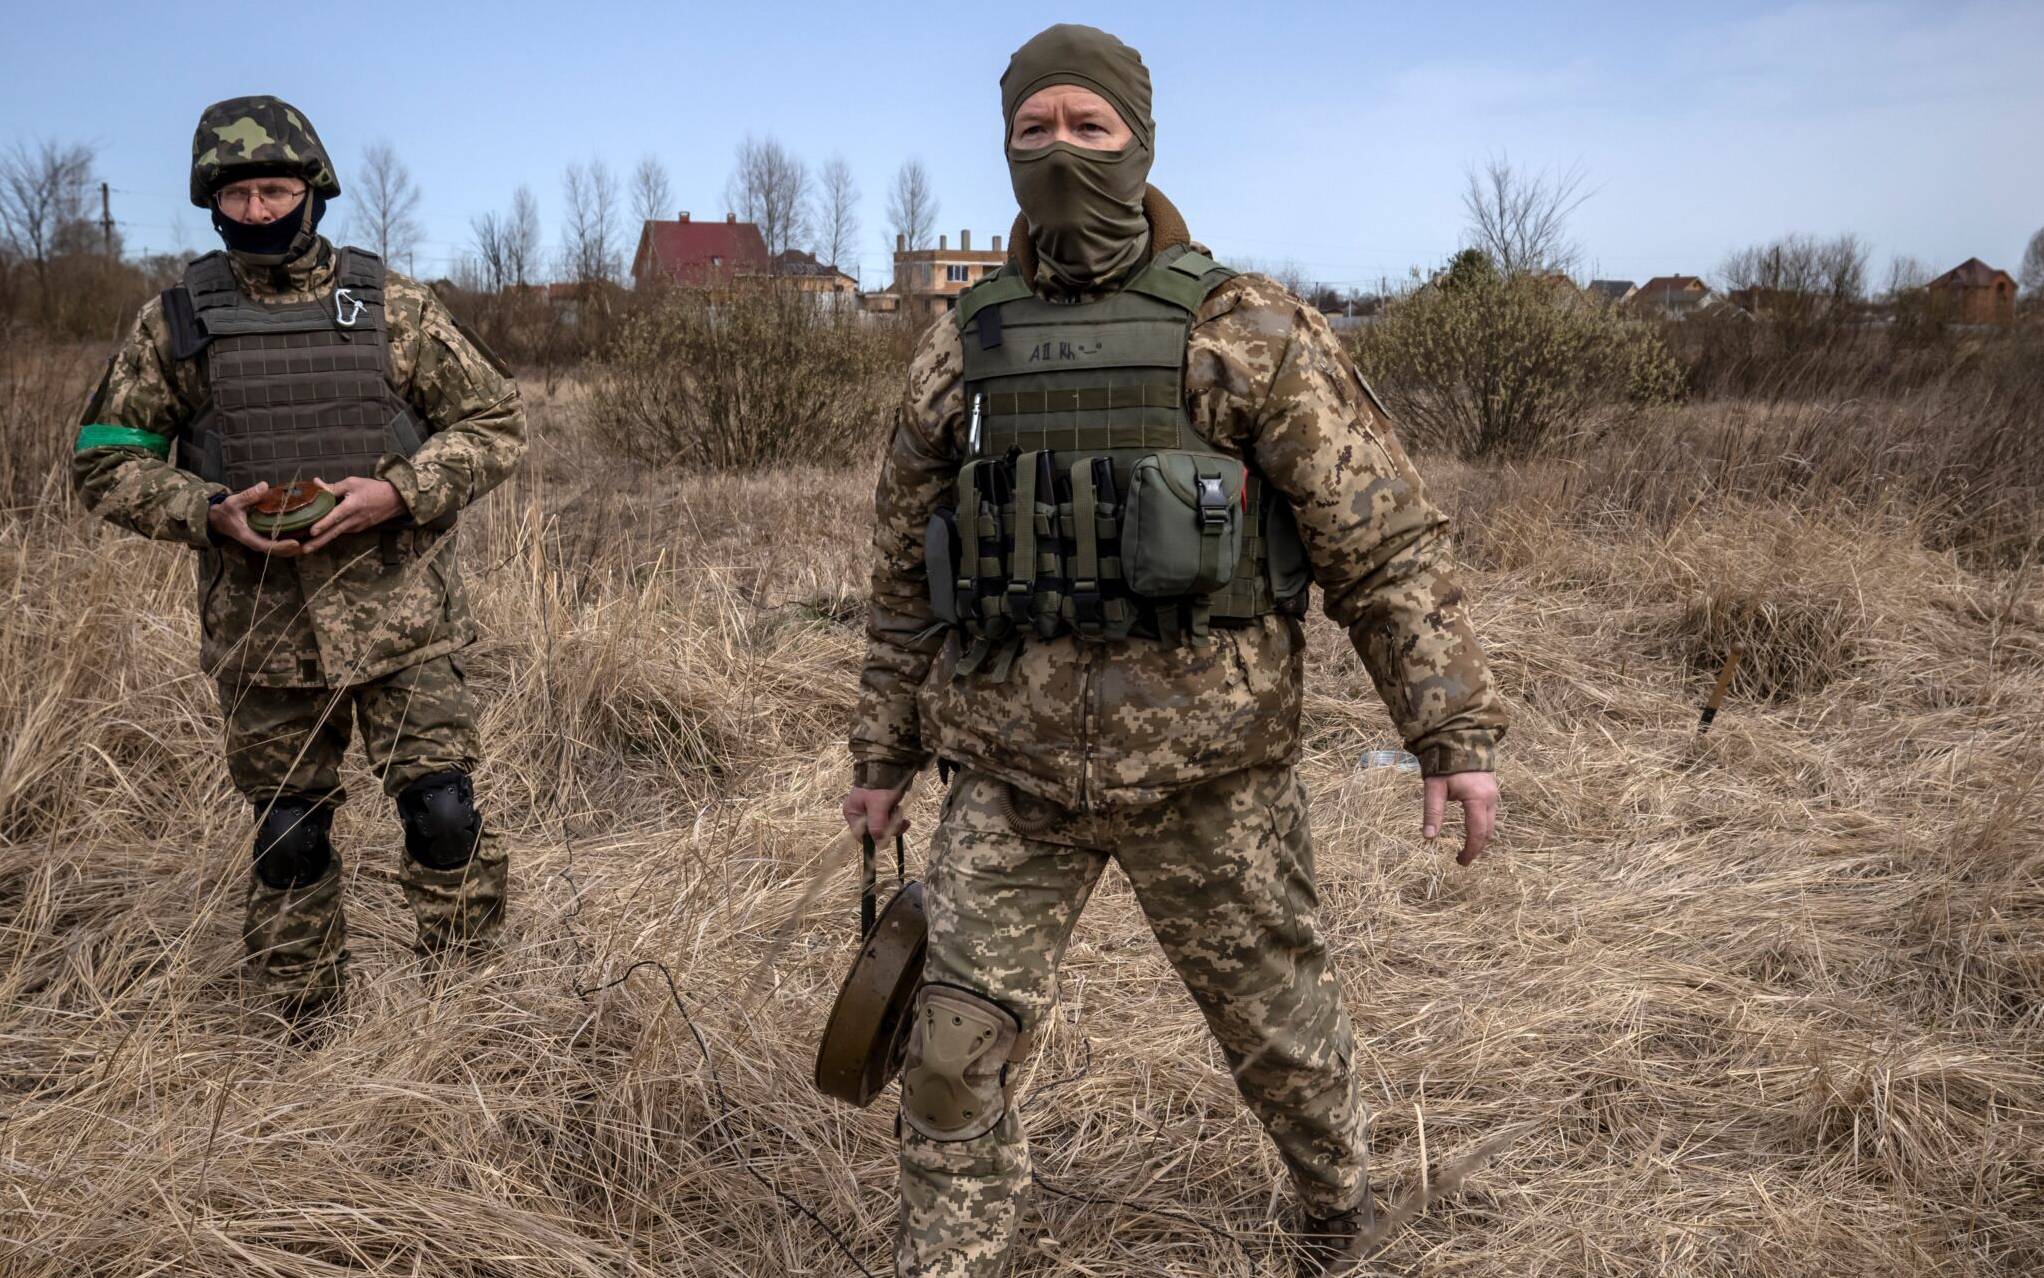 Members of a bomb disposal squad walk in a mine field near Brovary, northeast of Kyiv, on April 14, 2022, amid Russia's military invasion launched on Ukraine. - Russia called off its northern offensive to take Kyiv at the end of March, and since then Ukrainian citizens and soldiers have returned to the land they occupied. In recent weeks AFP has seen countless unexploded munitions lying in the streets of towns and villages north-east and north-west of the capital, abandoned or mislaid in the hasty withdrawal. (Photo by FADEL SENNA / AFP)